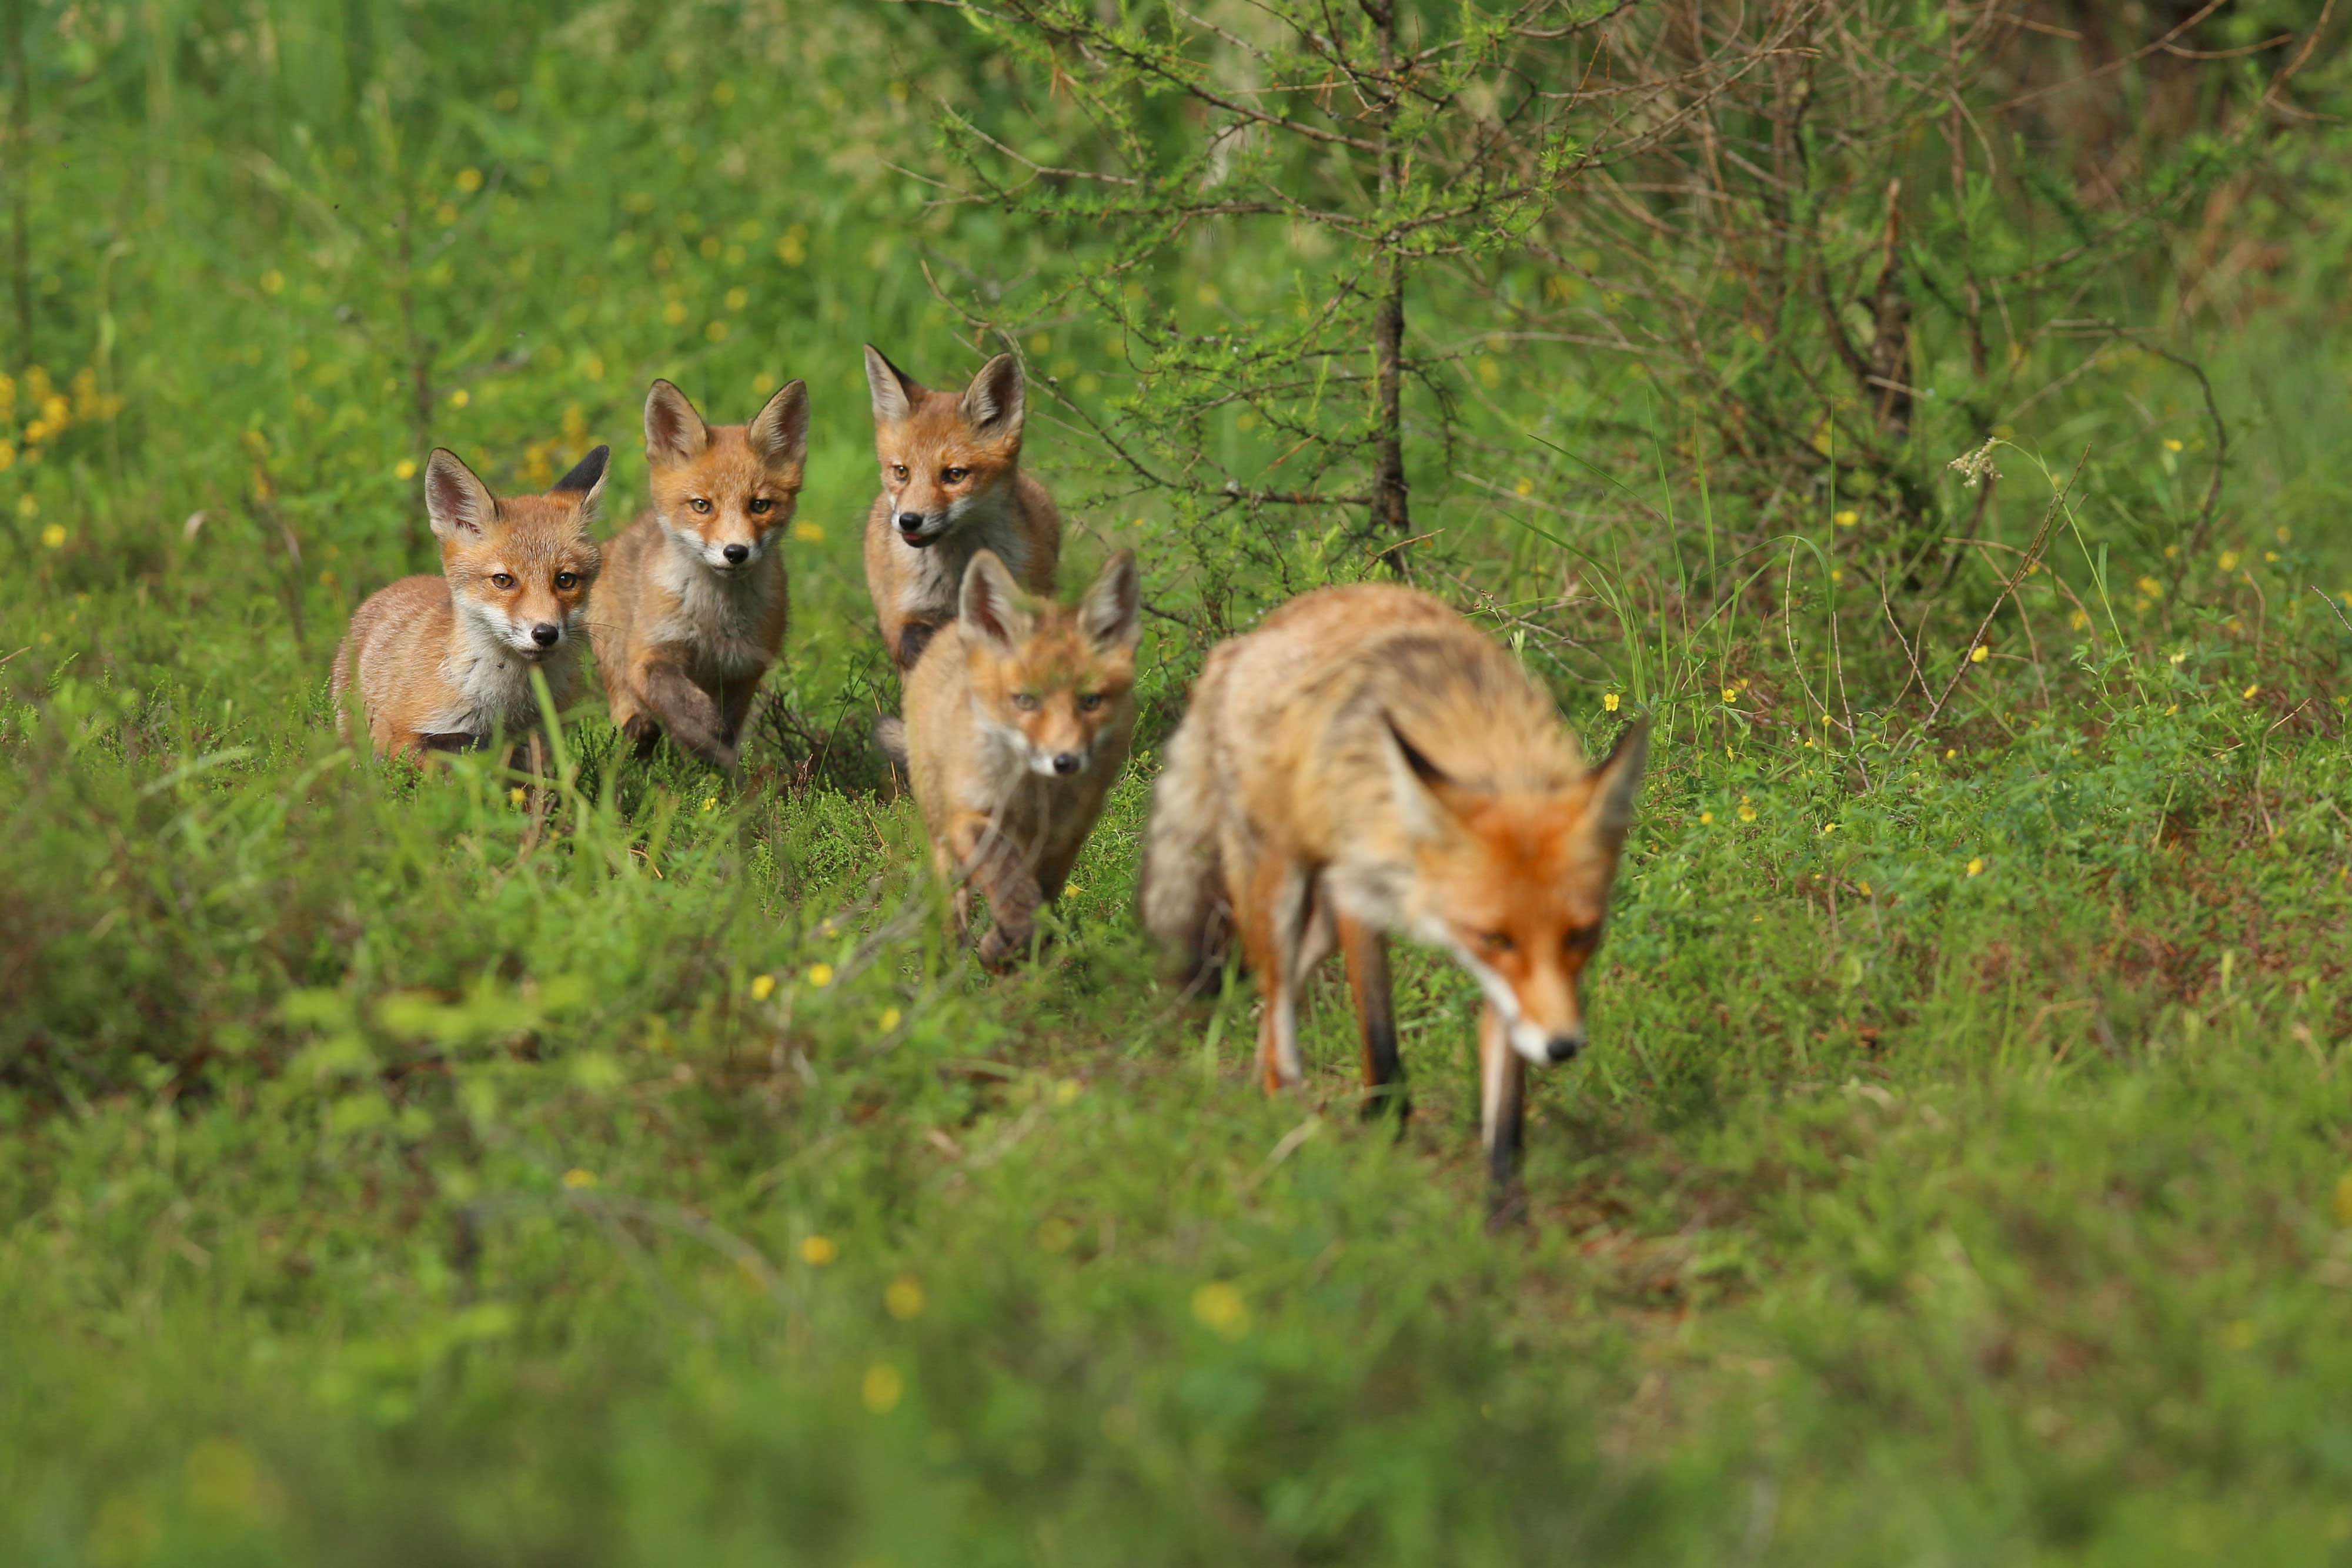 A red fox with its kits walking in a field.